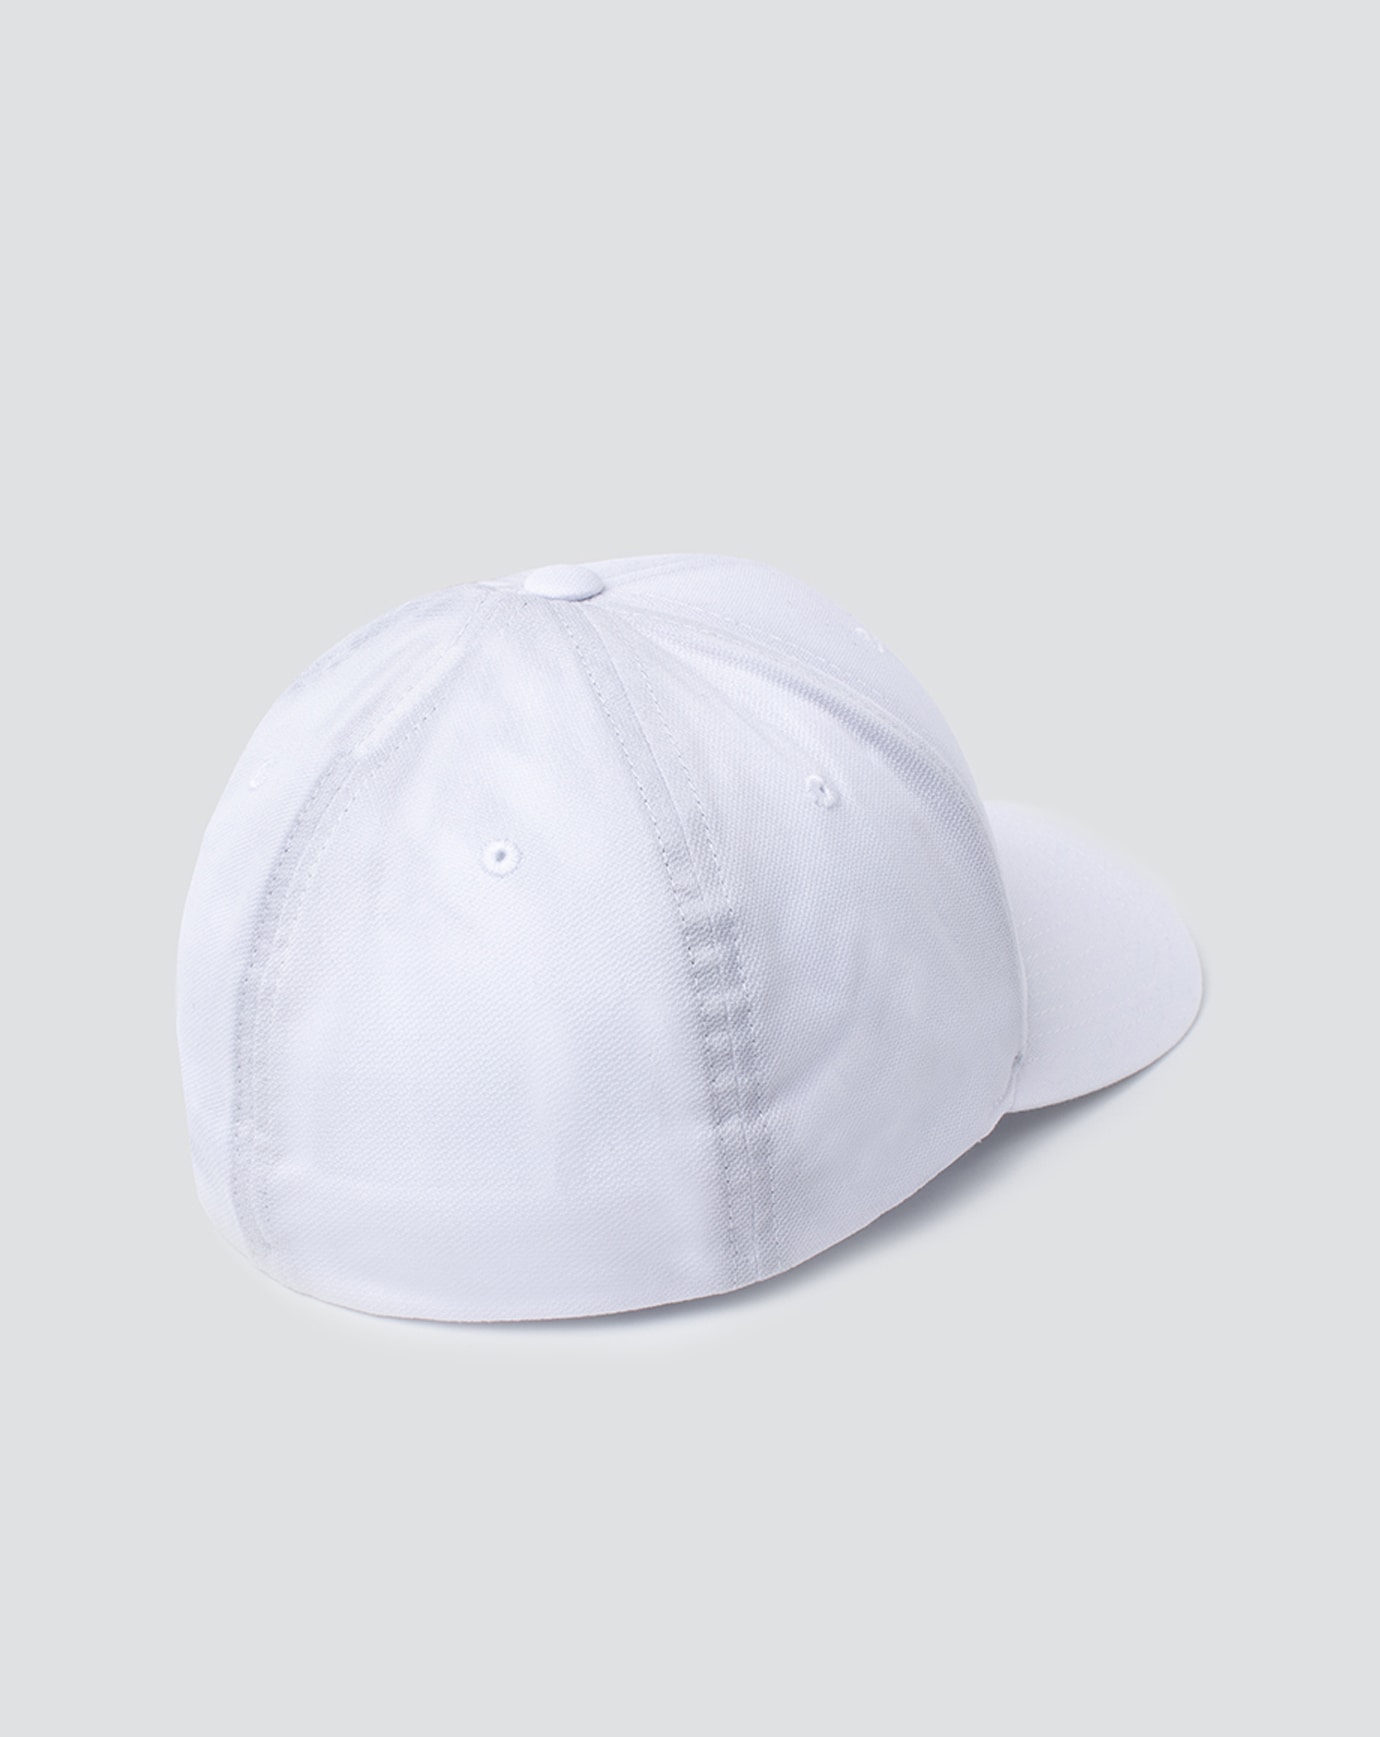 ALL THE POWDER FITTED HAT Image Thumbnail 3